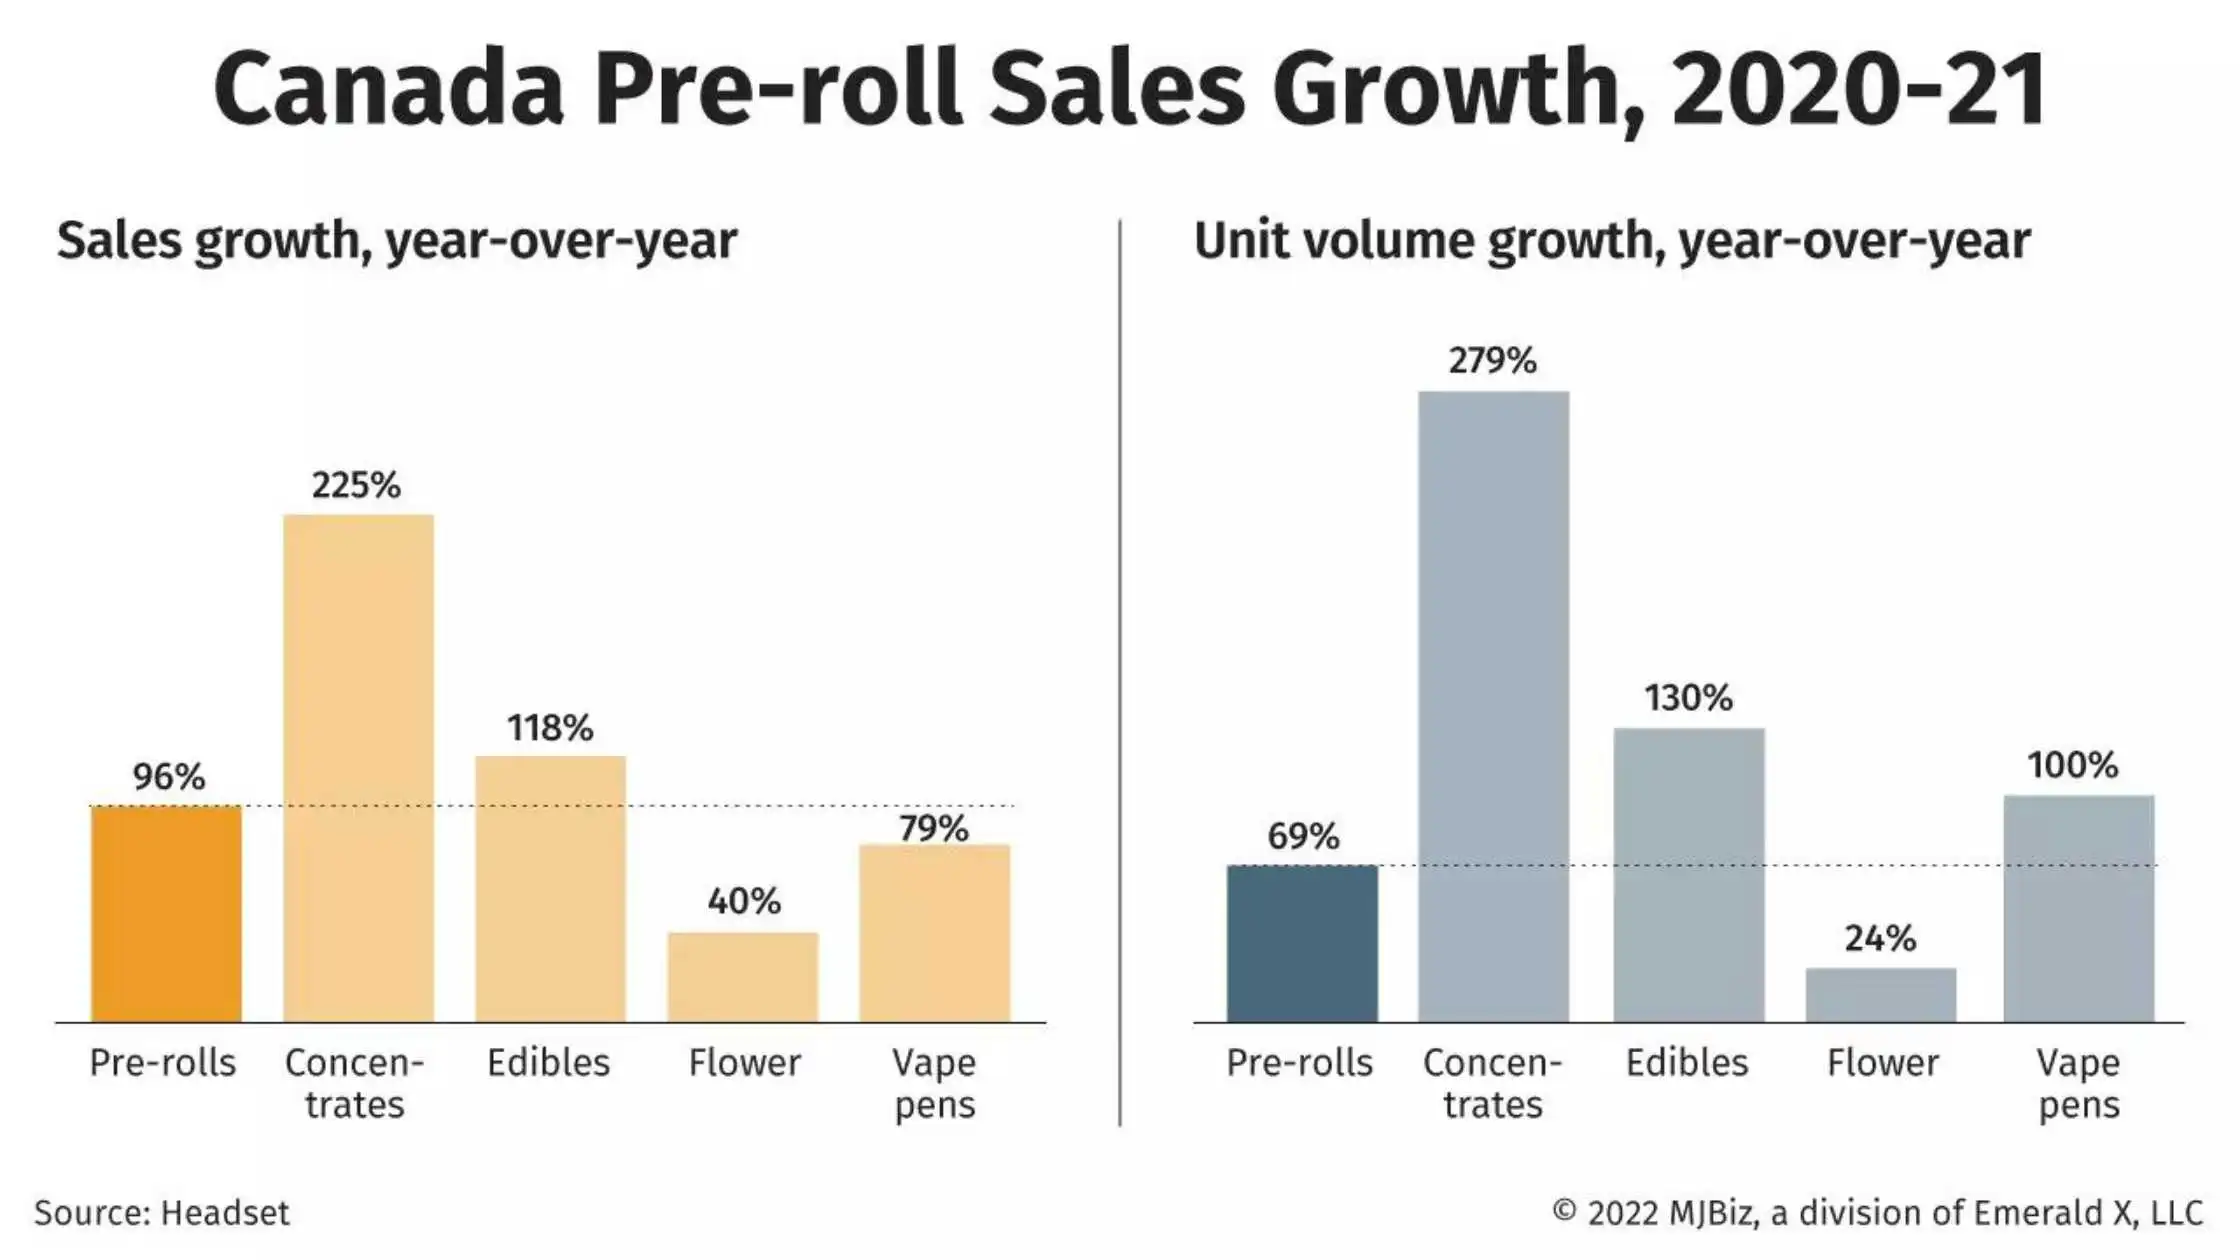 Canada: Pre-rolls Stout at No.2 amongst Cannabis Products, Outpacing Total Market Sales Growth